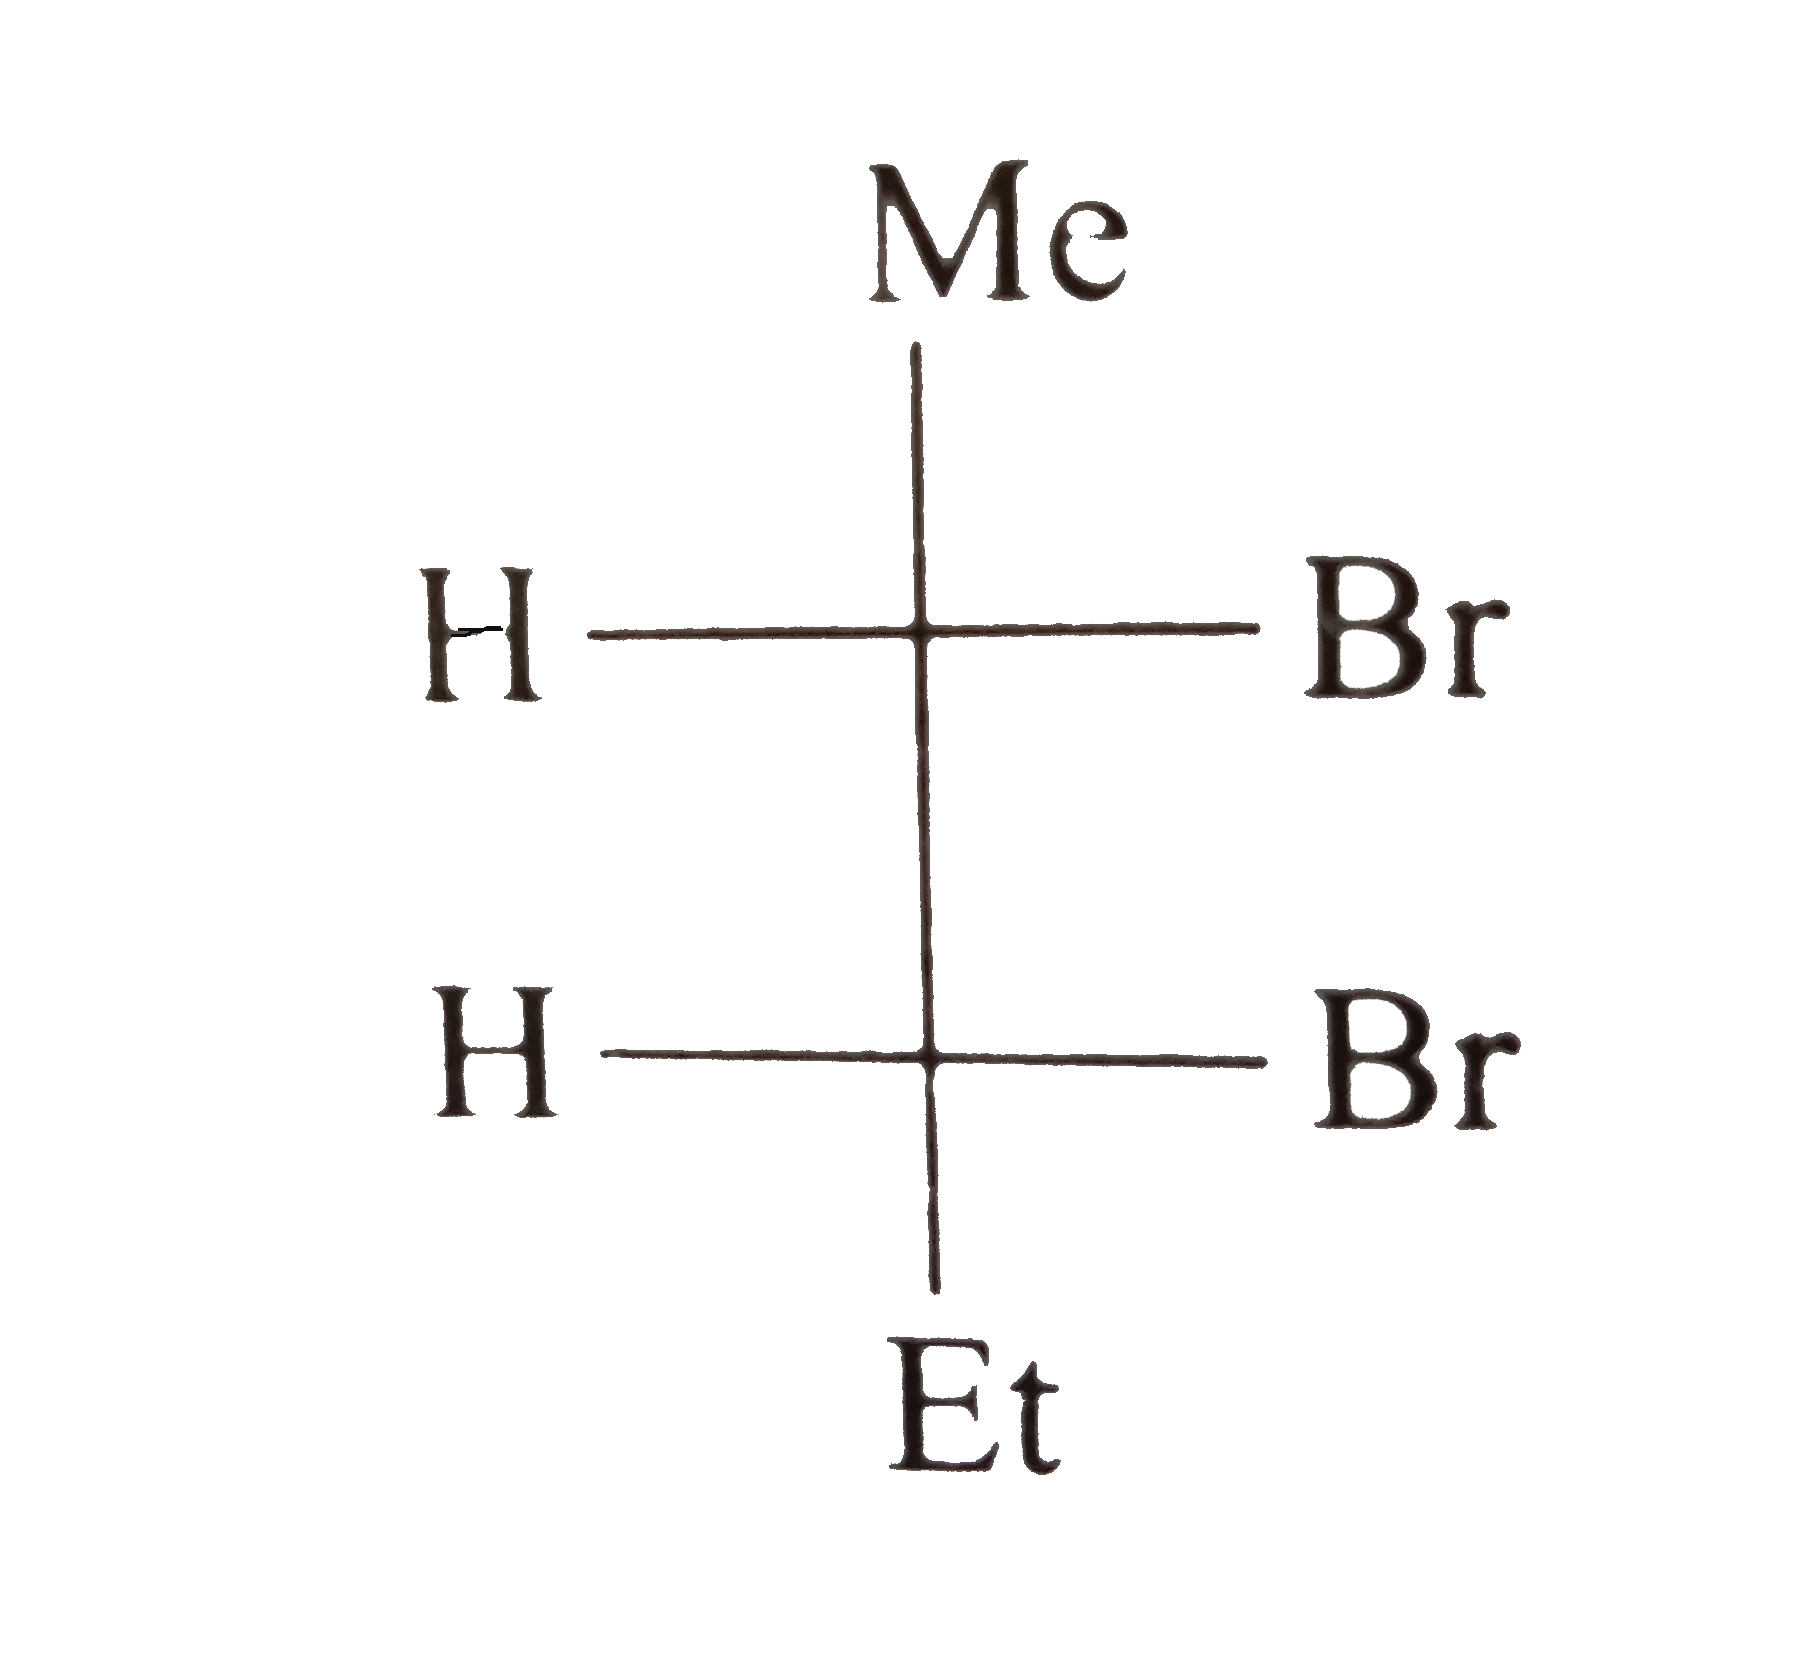 An alkene on reaction with Br(2)//C CI(4) produces the following products:      and its enantiomer in equal amounts. The alkene is